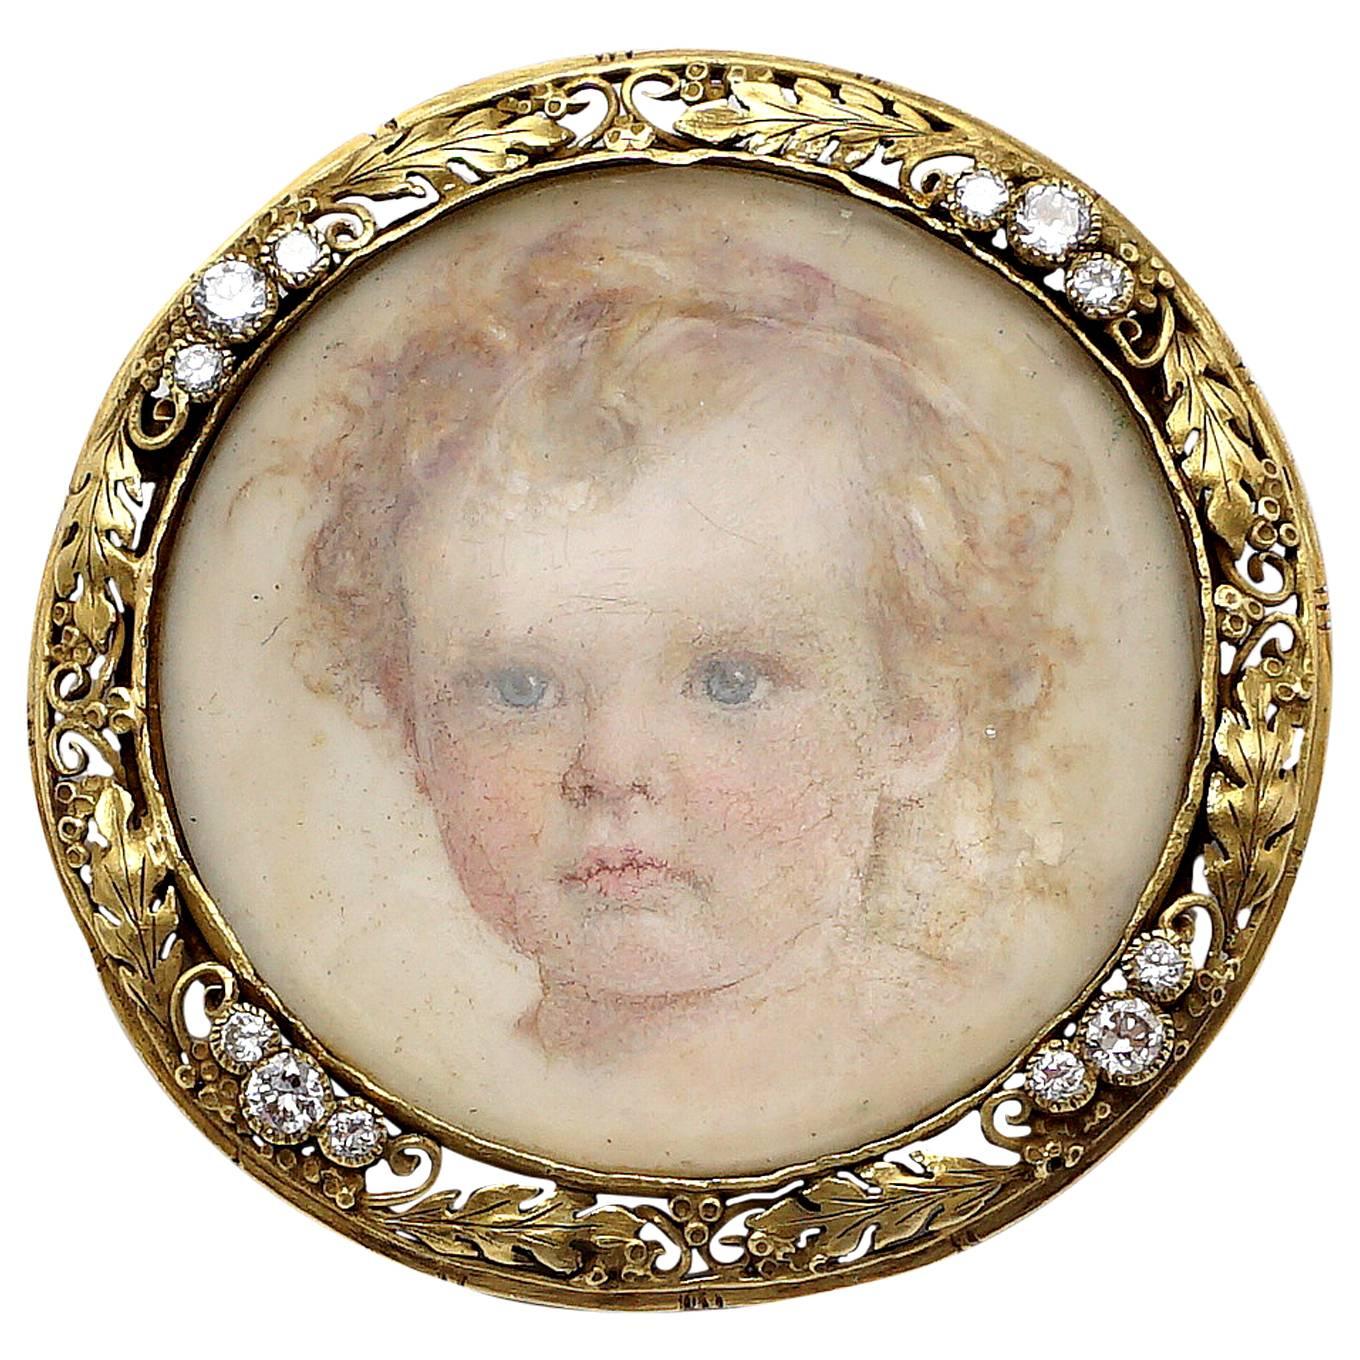 An edwardian period portrait brooch by the famed Edward Oakes.  Renowned for his arts and crafts inspired jewelry using leaves, berries, and bezel set gemstones this piece is a prime example of exactly what Oakes is famous for.  Featuring a